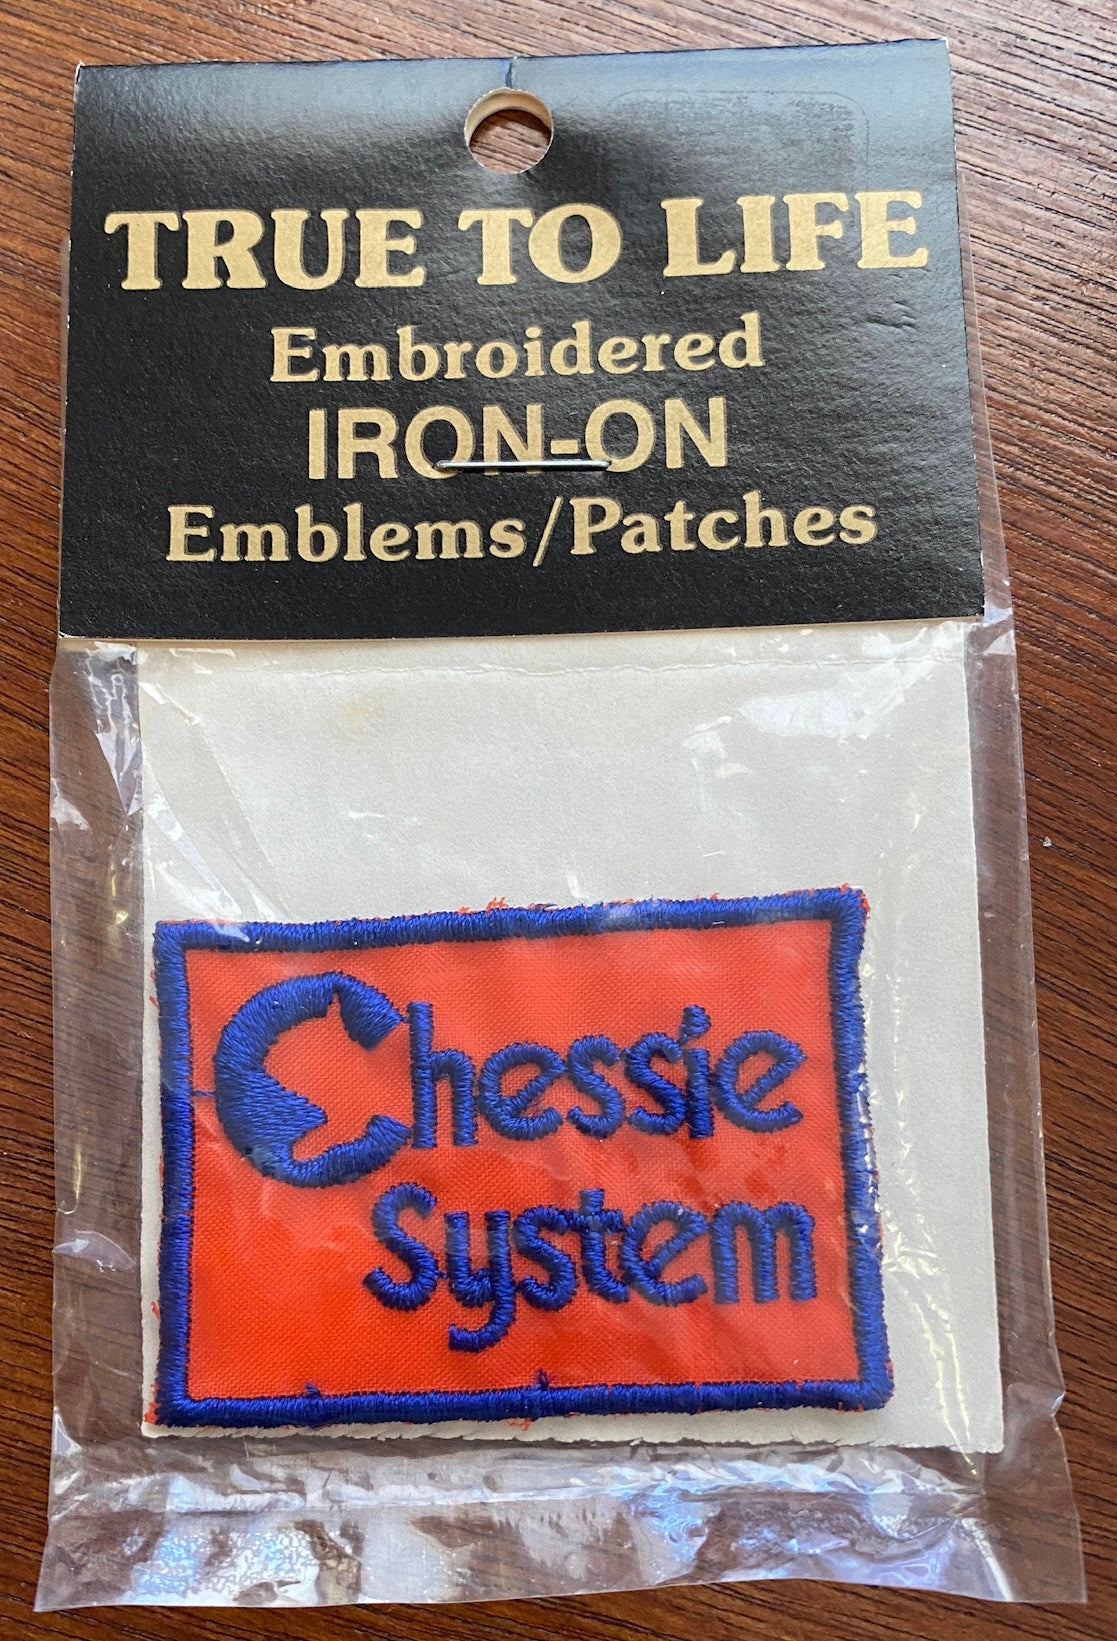 Chessie System NOS Iron On Embroidered Patch Emblem Railroad Trains